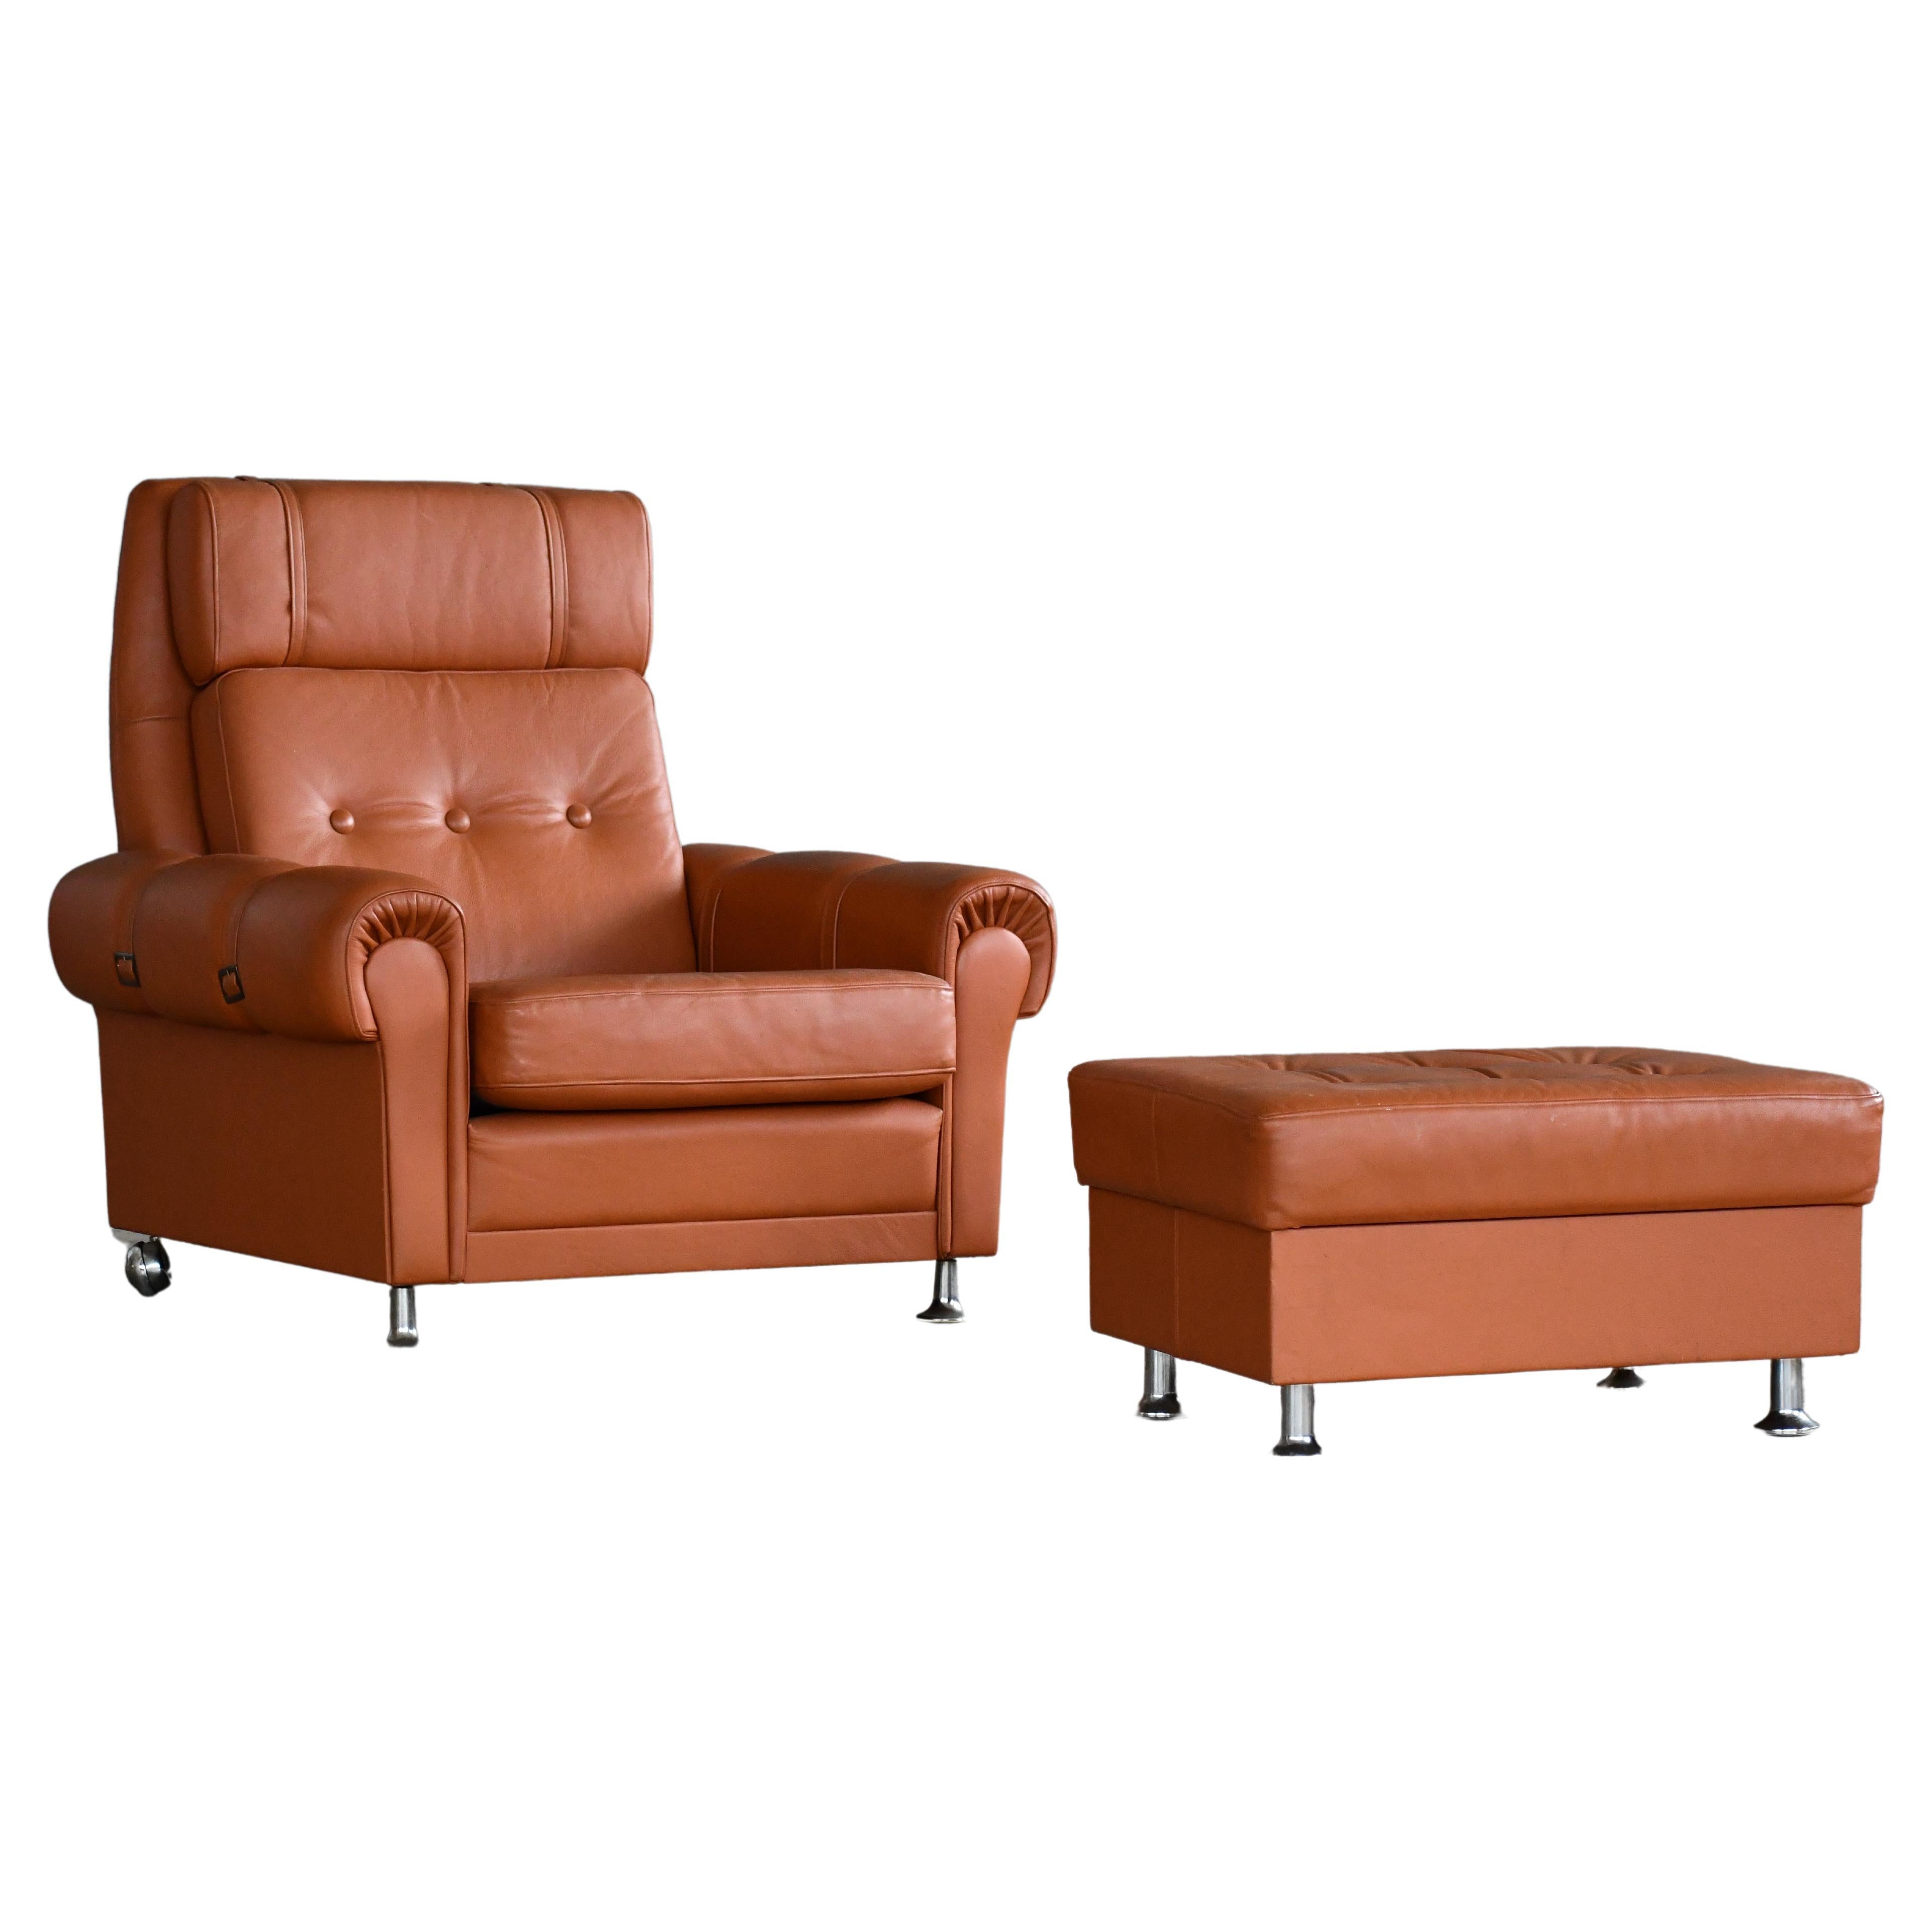 Illum Wikkelsø Style Leather Lounge Chair with Ottoman Cognac Colored Leather 